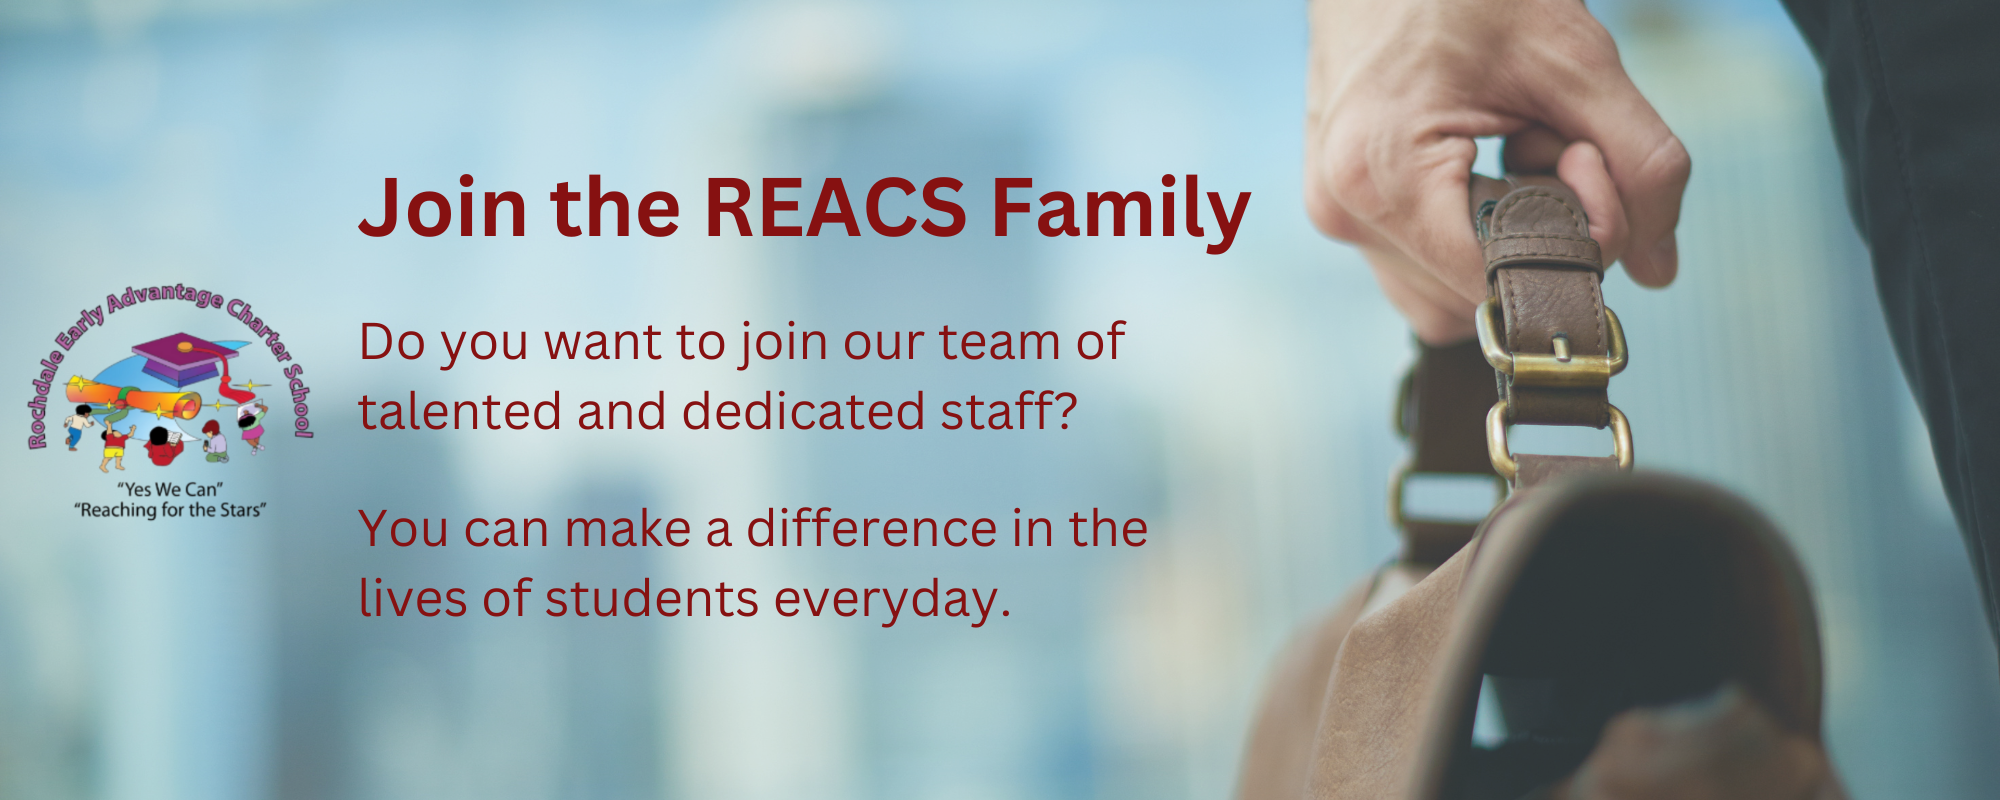 Join the REACS Family